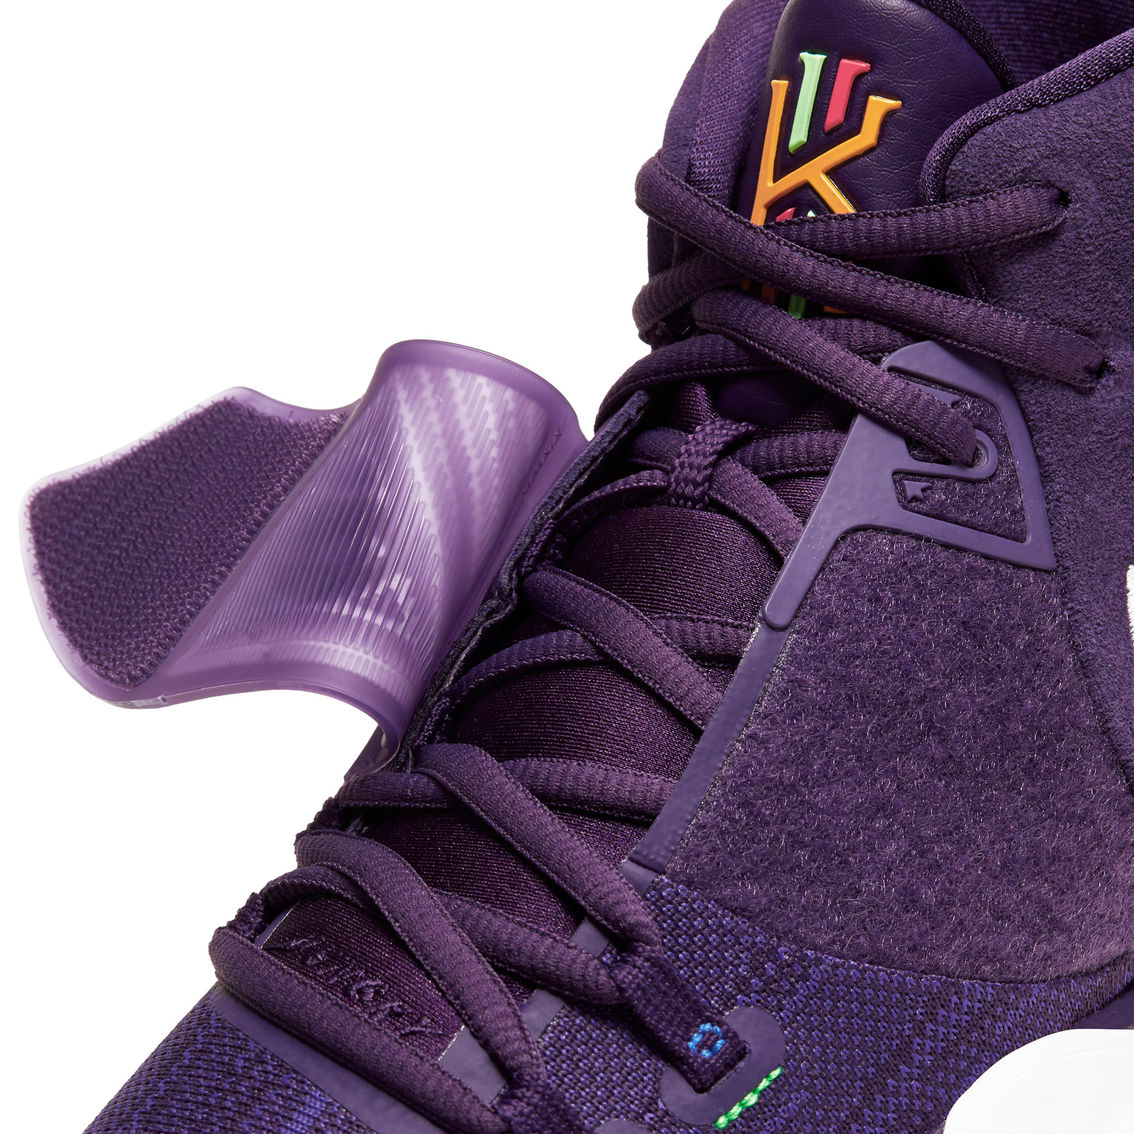 Nike Men's Kyrie VI Court Shoes - Image 7 of 7